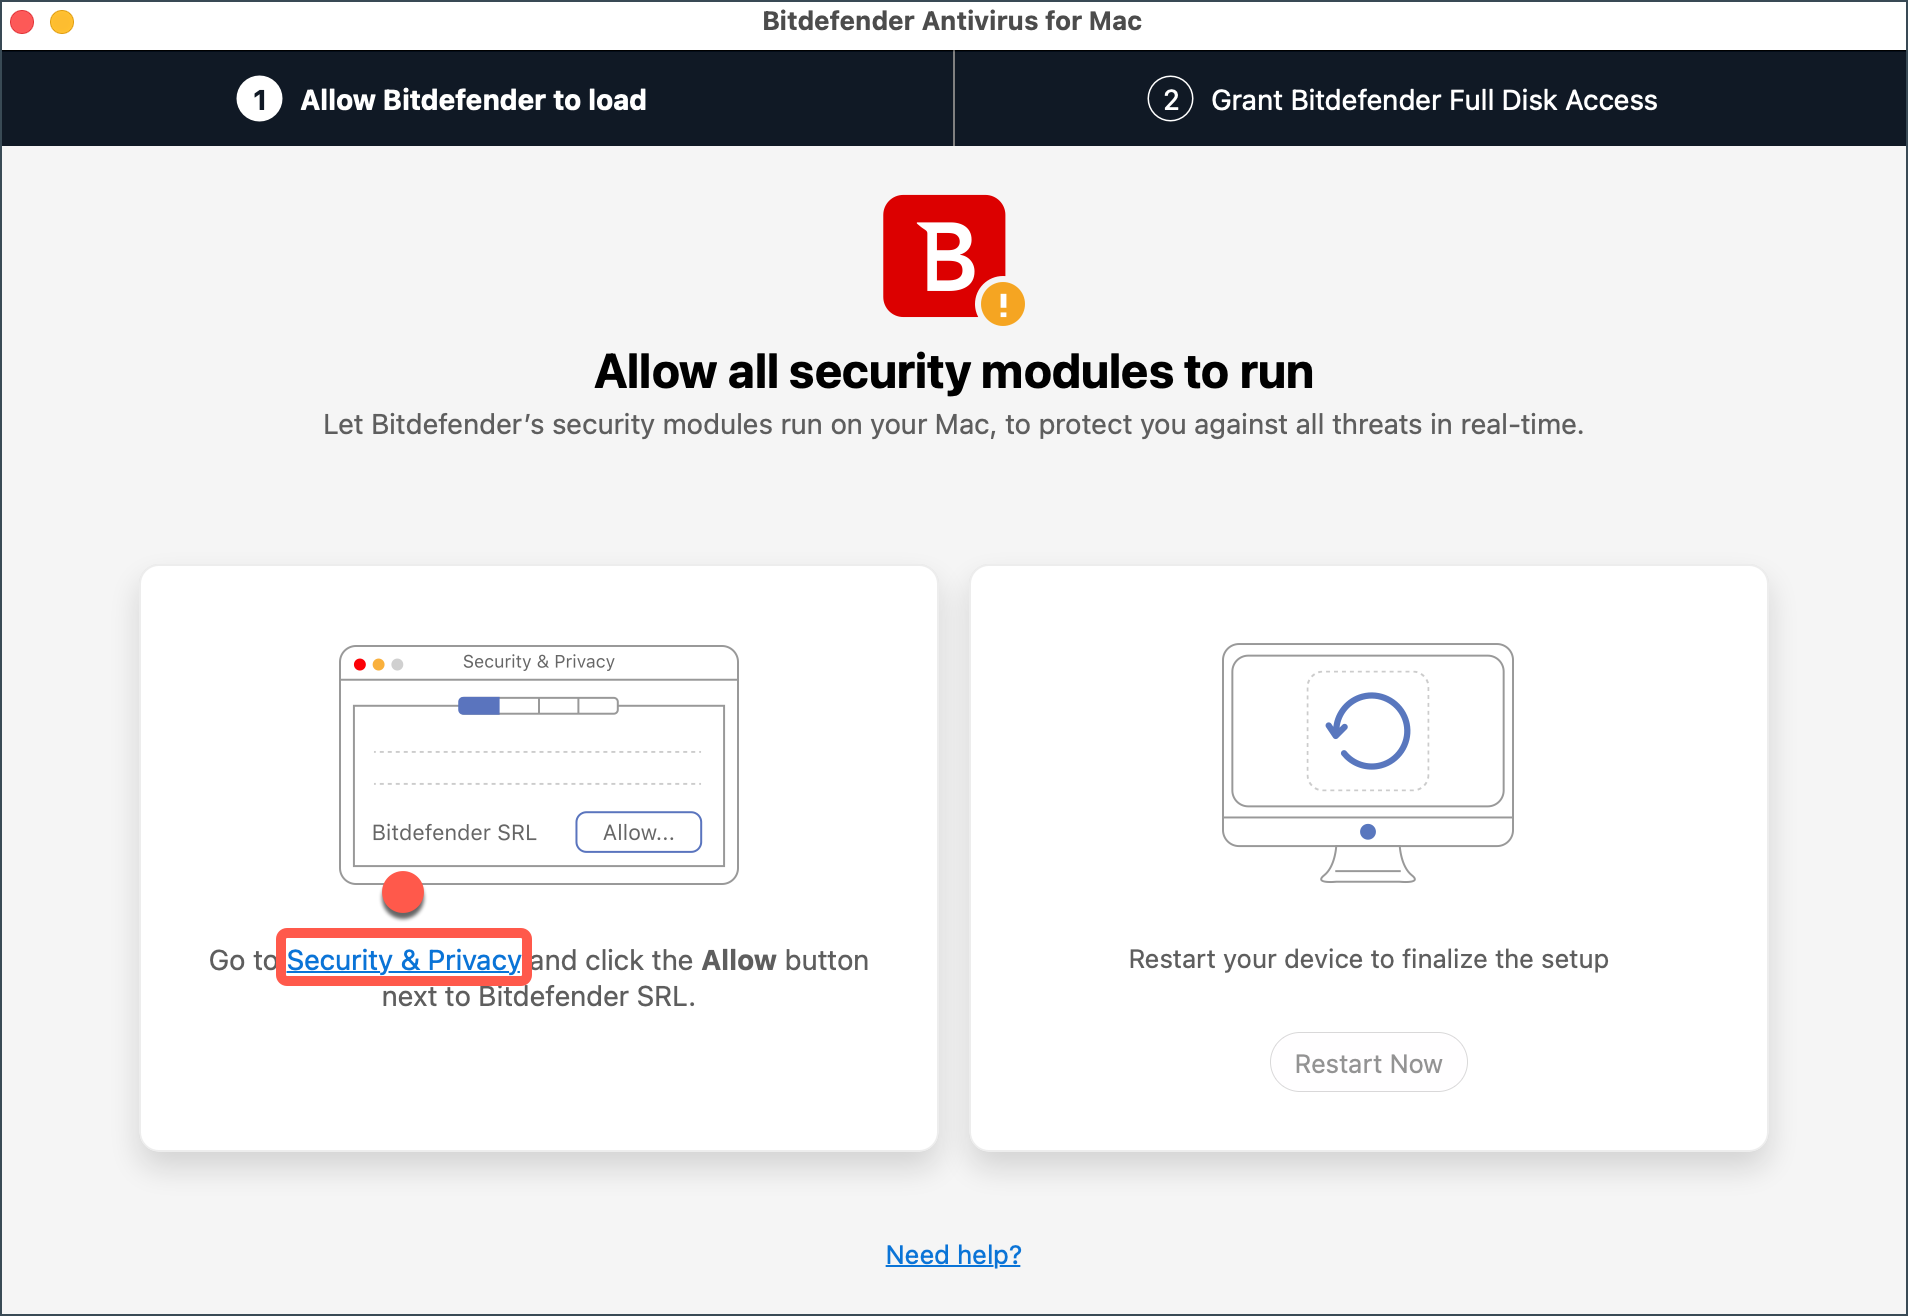 How to install Bitdefender Antivirus for Mac on macOS Mojave and later 